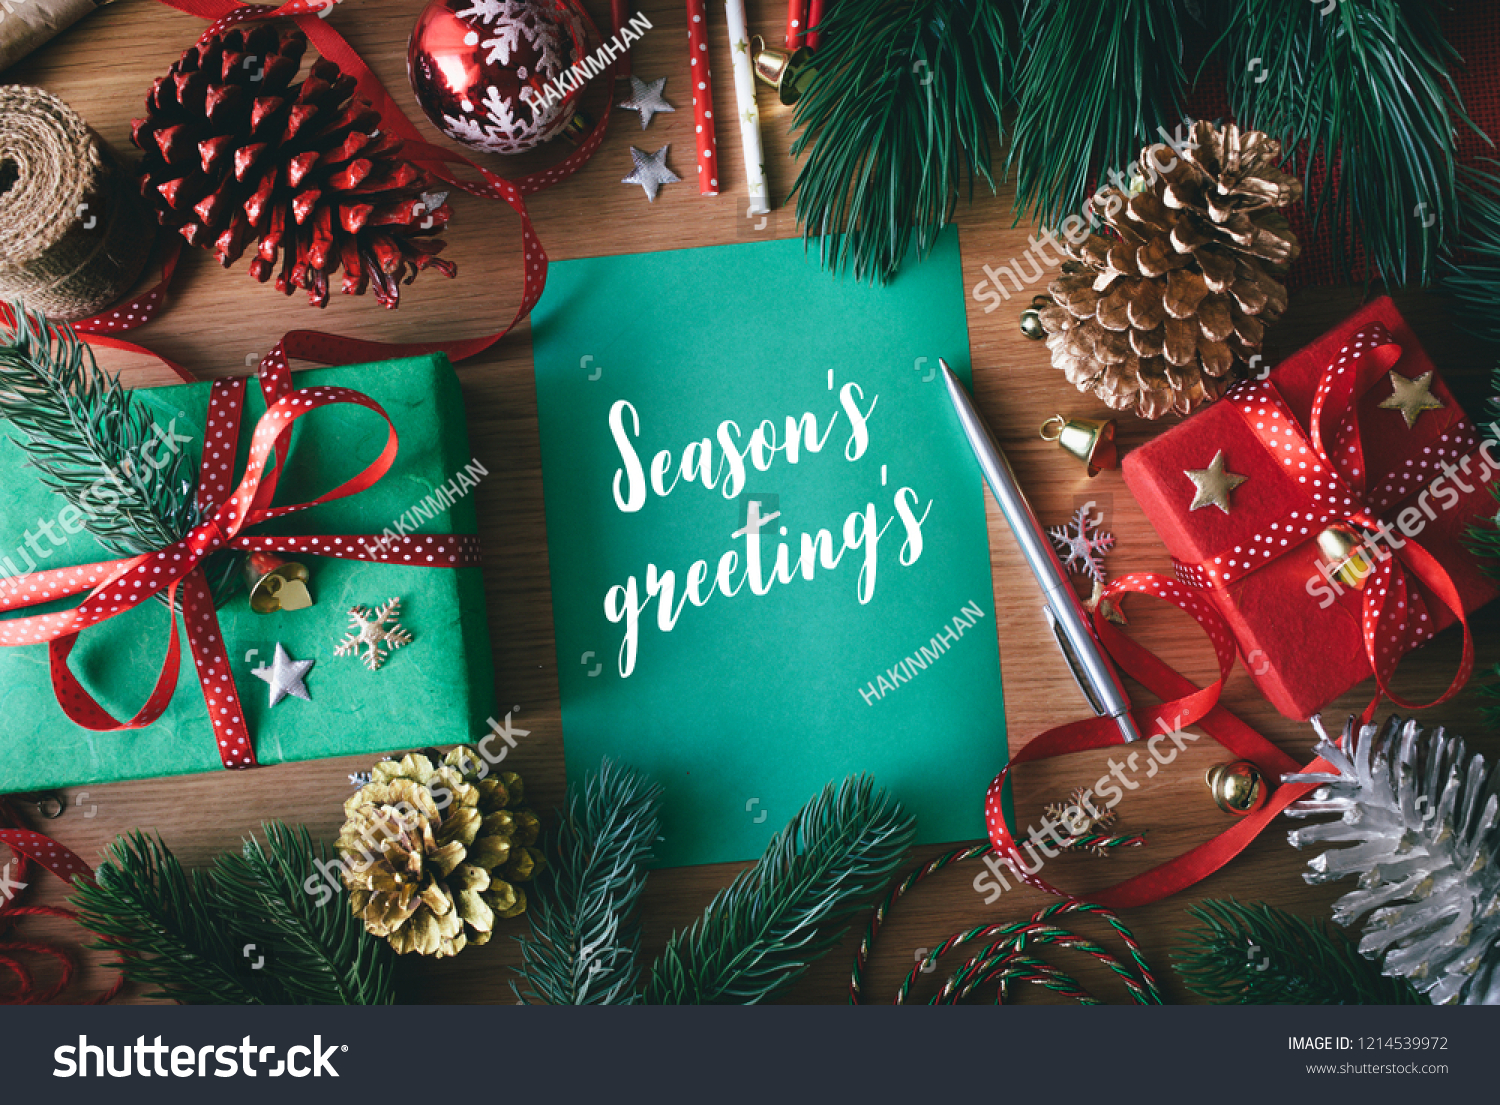 Season's greeting's concepts with cards and gift box present,ornament element on wood table background.Merry christmas and winter collection images #1214539972